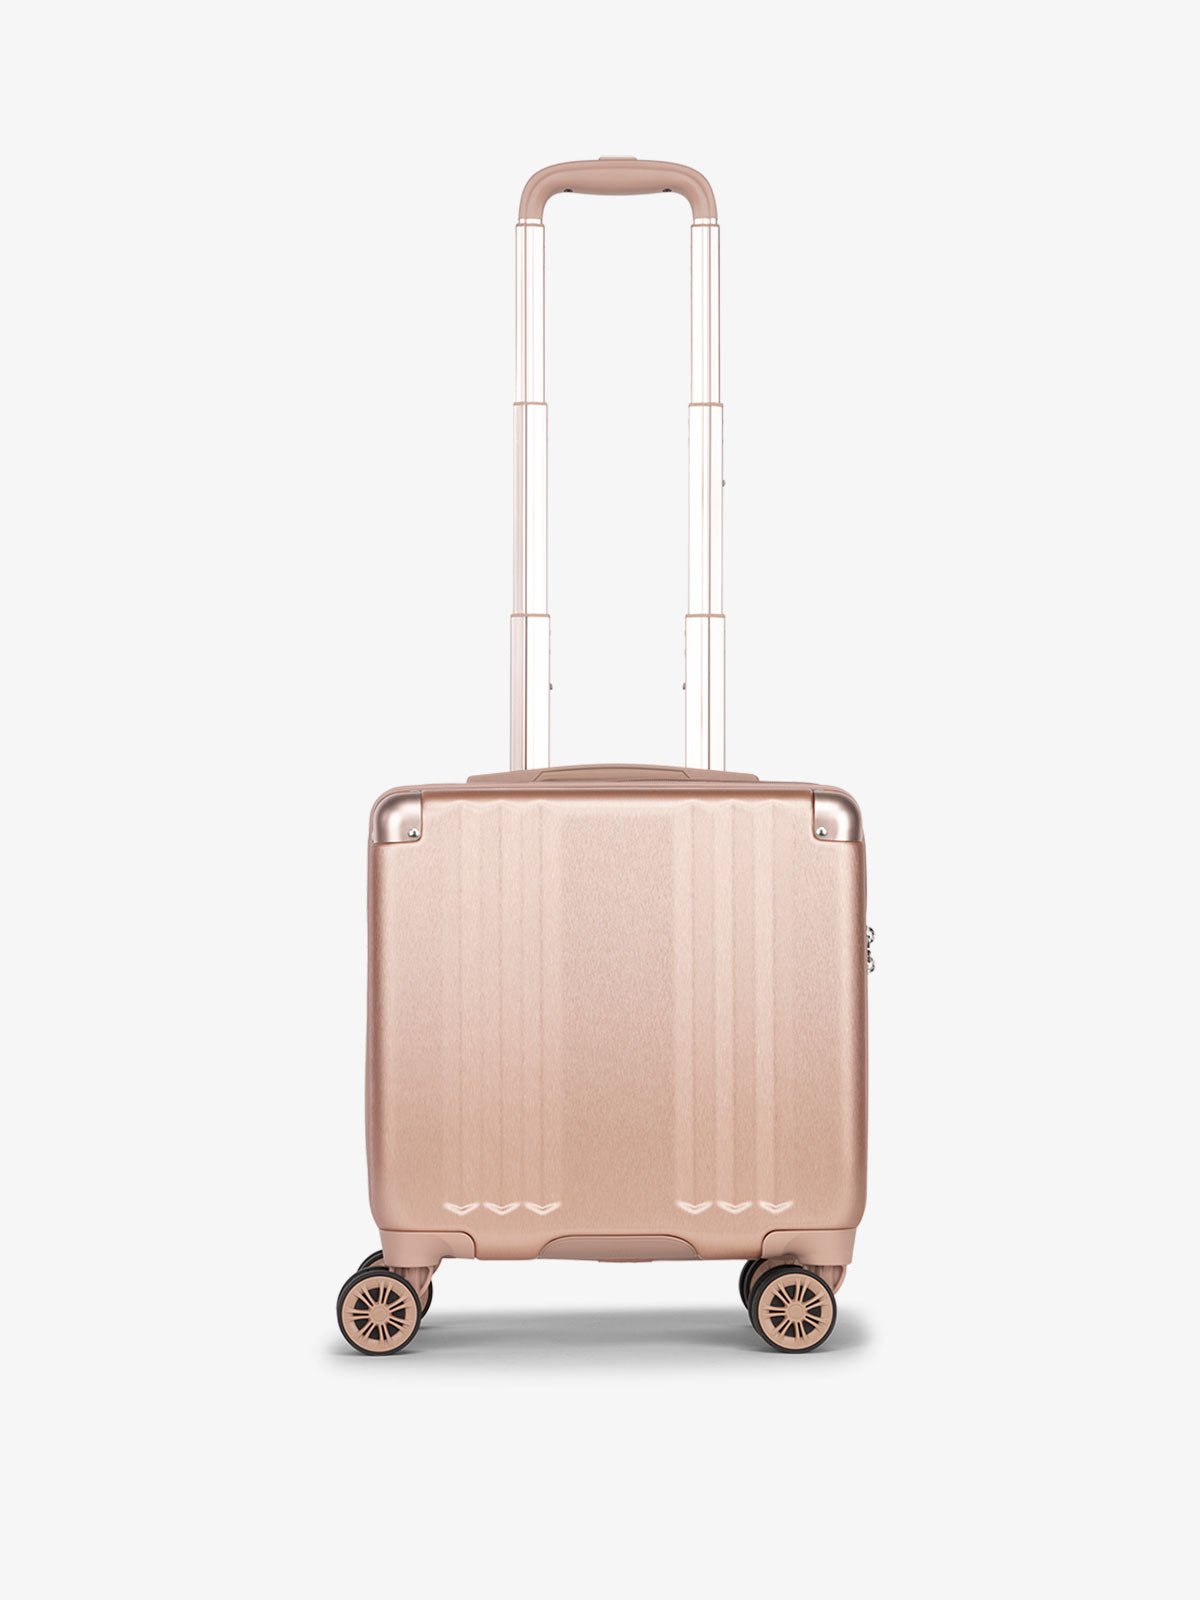 CALPAK Ambuer small carry on luggage with 360 spinner wheels in rose gold